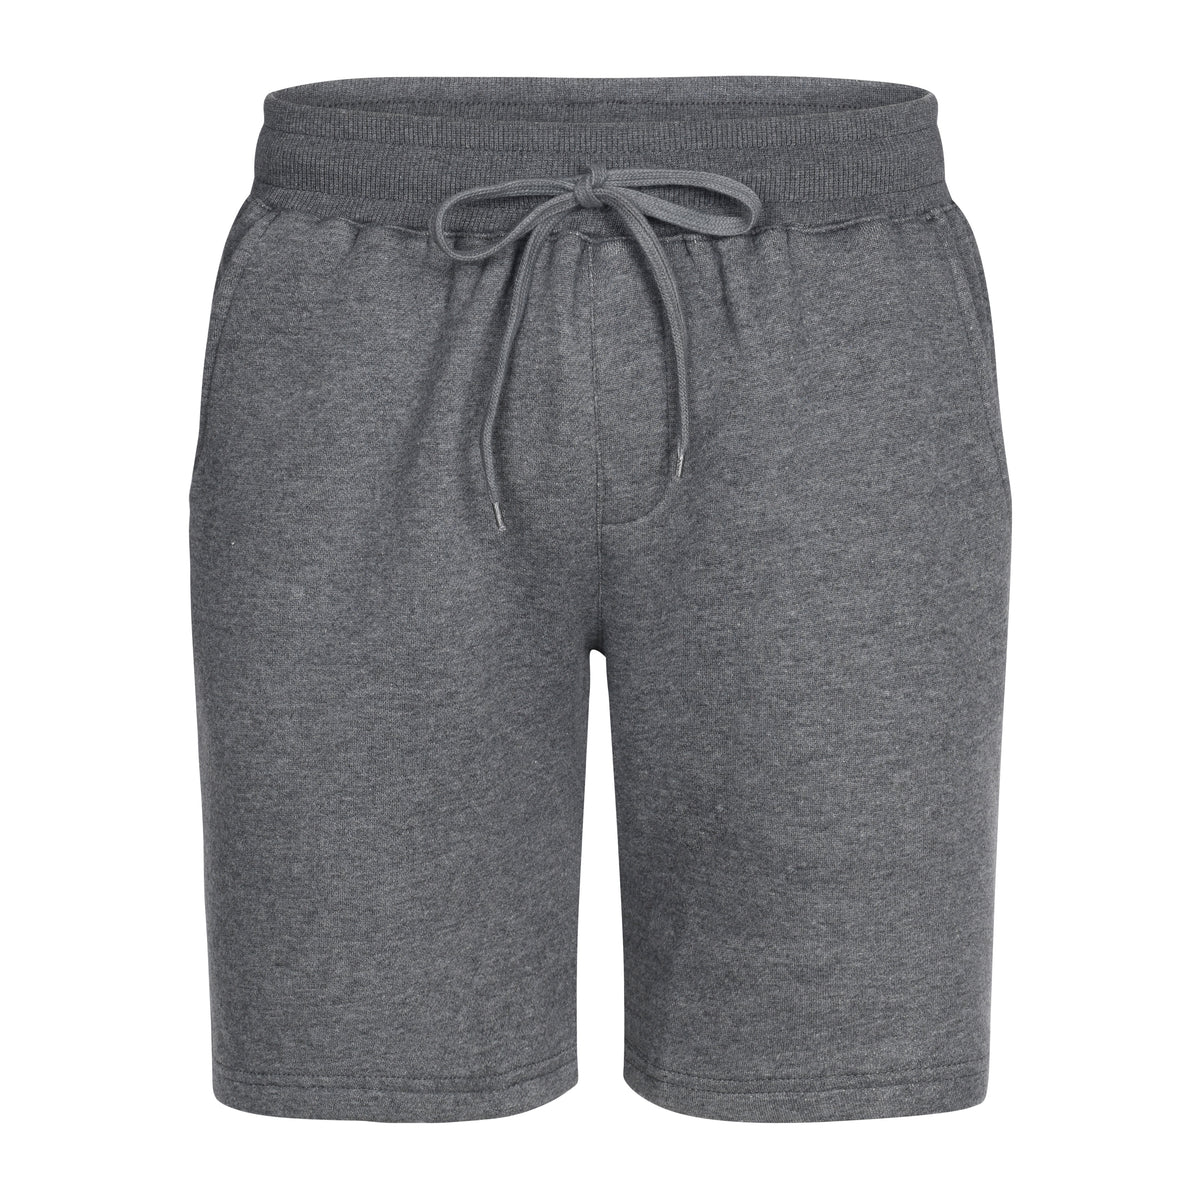 Contraband Sports 119 Midweight 8in Inseam Fleece Sweat Shorts